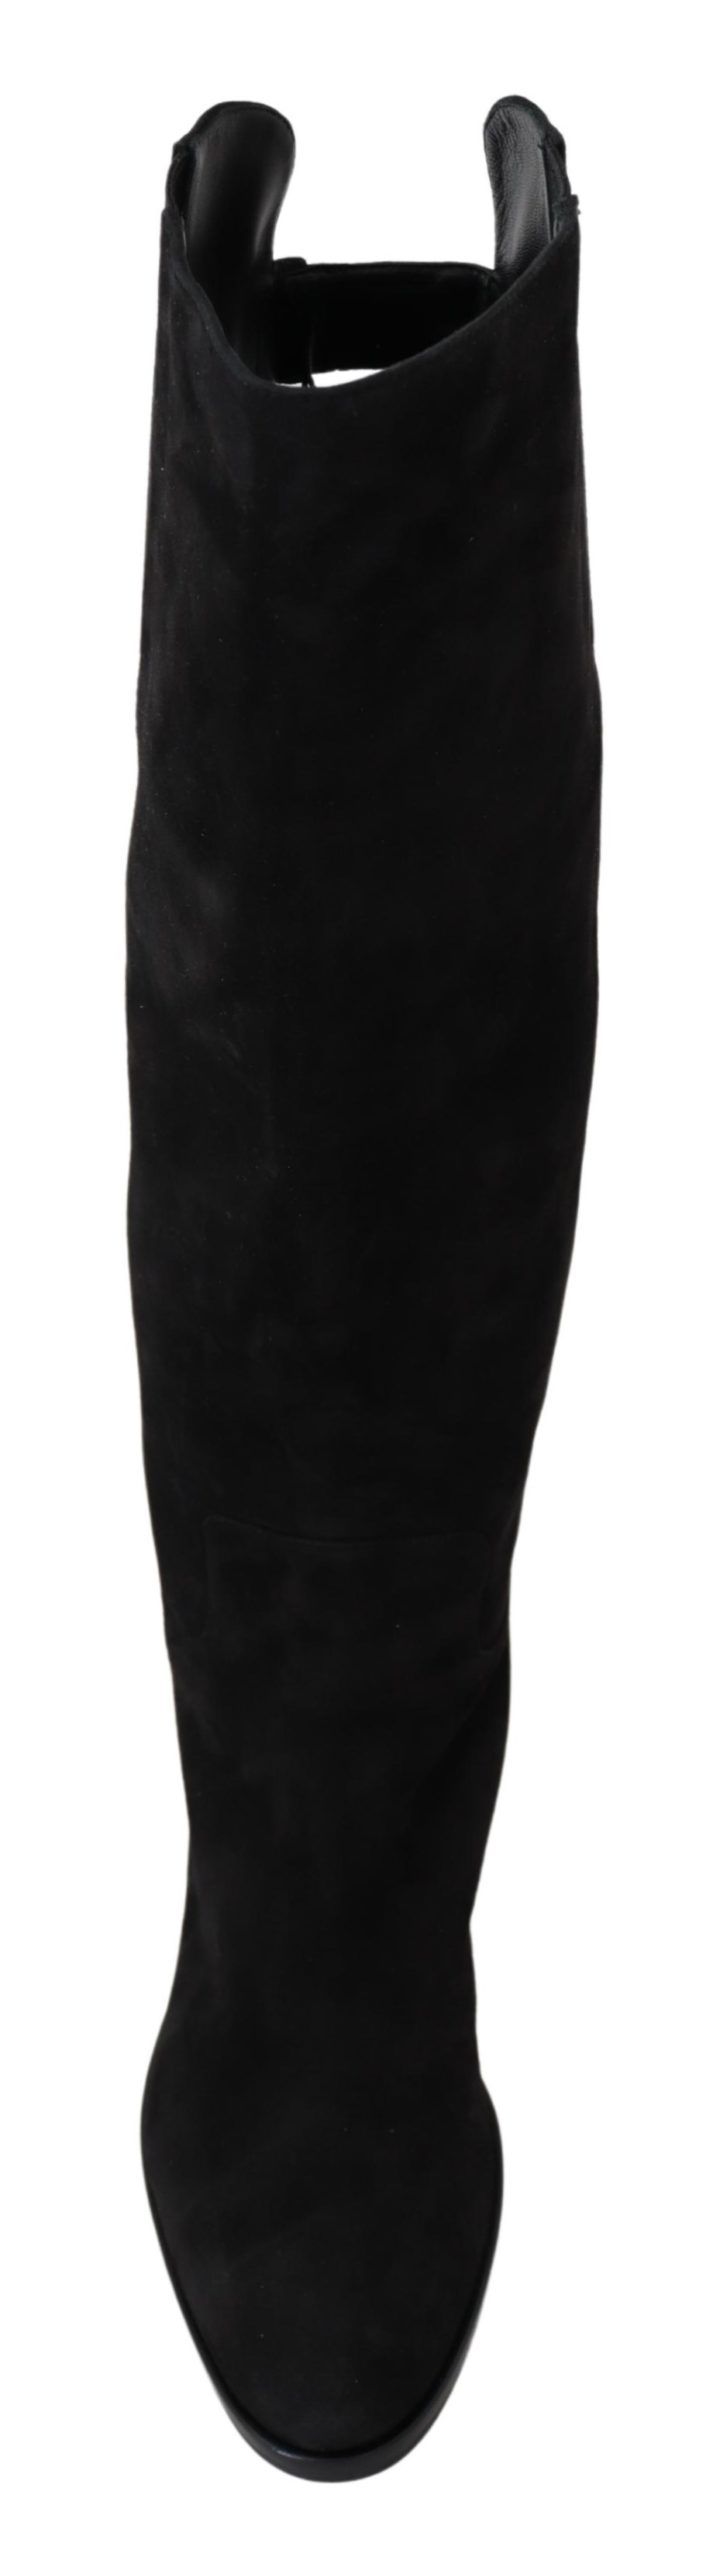 Elegant Knee High Suede Leather Boots